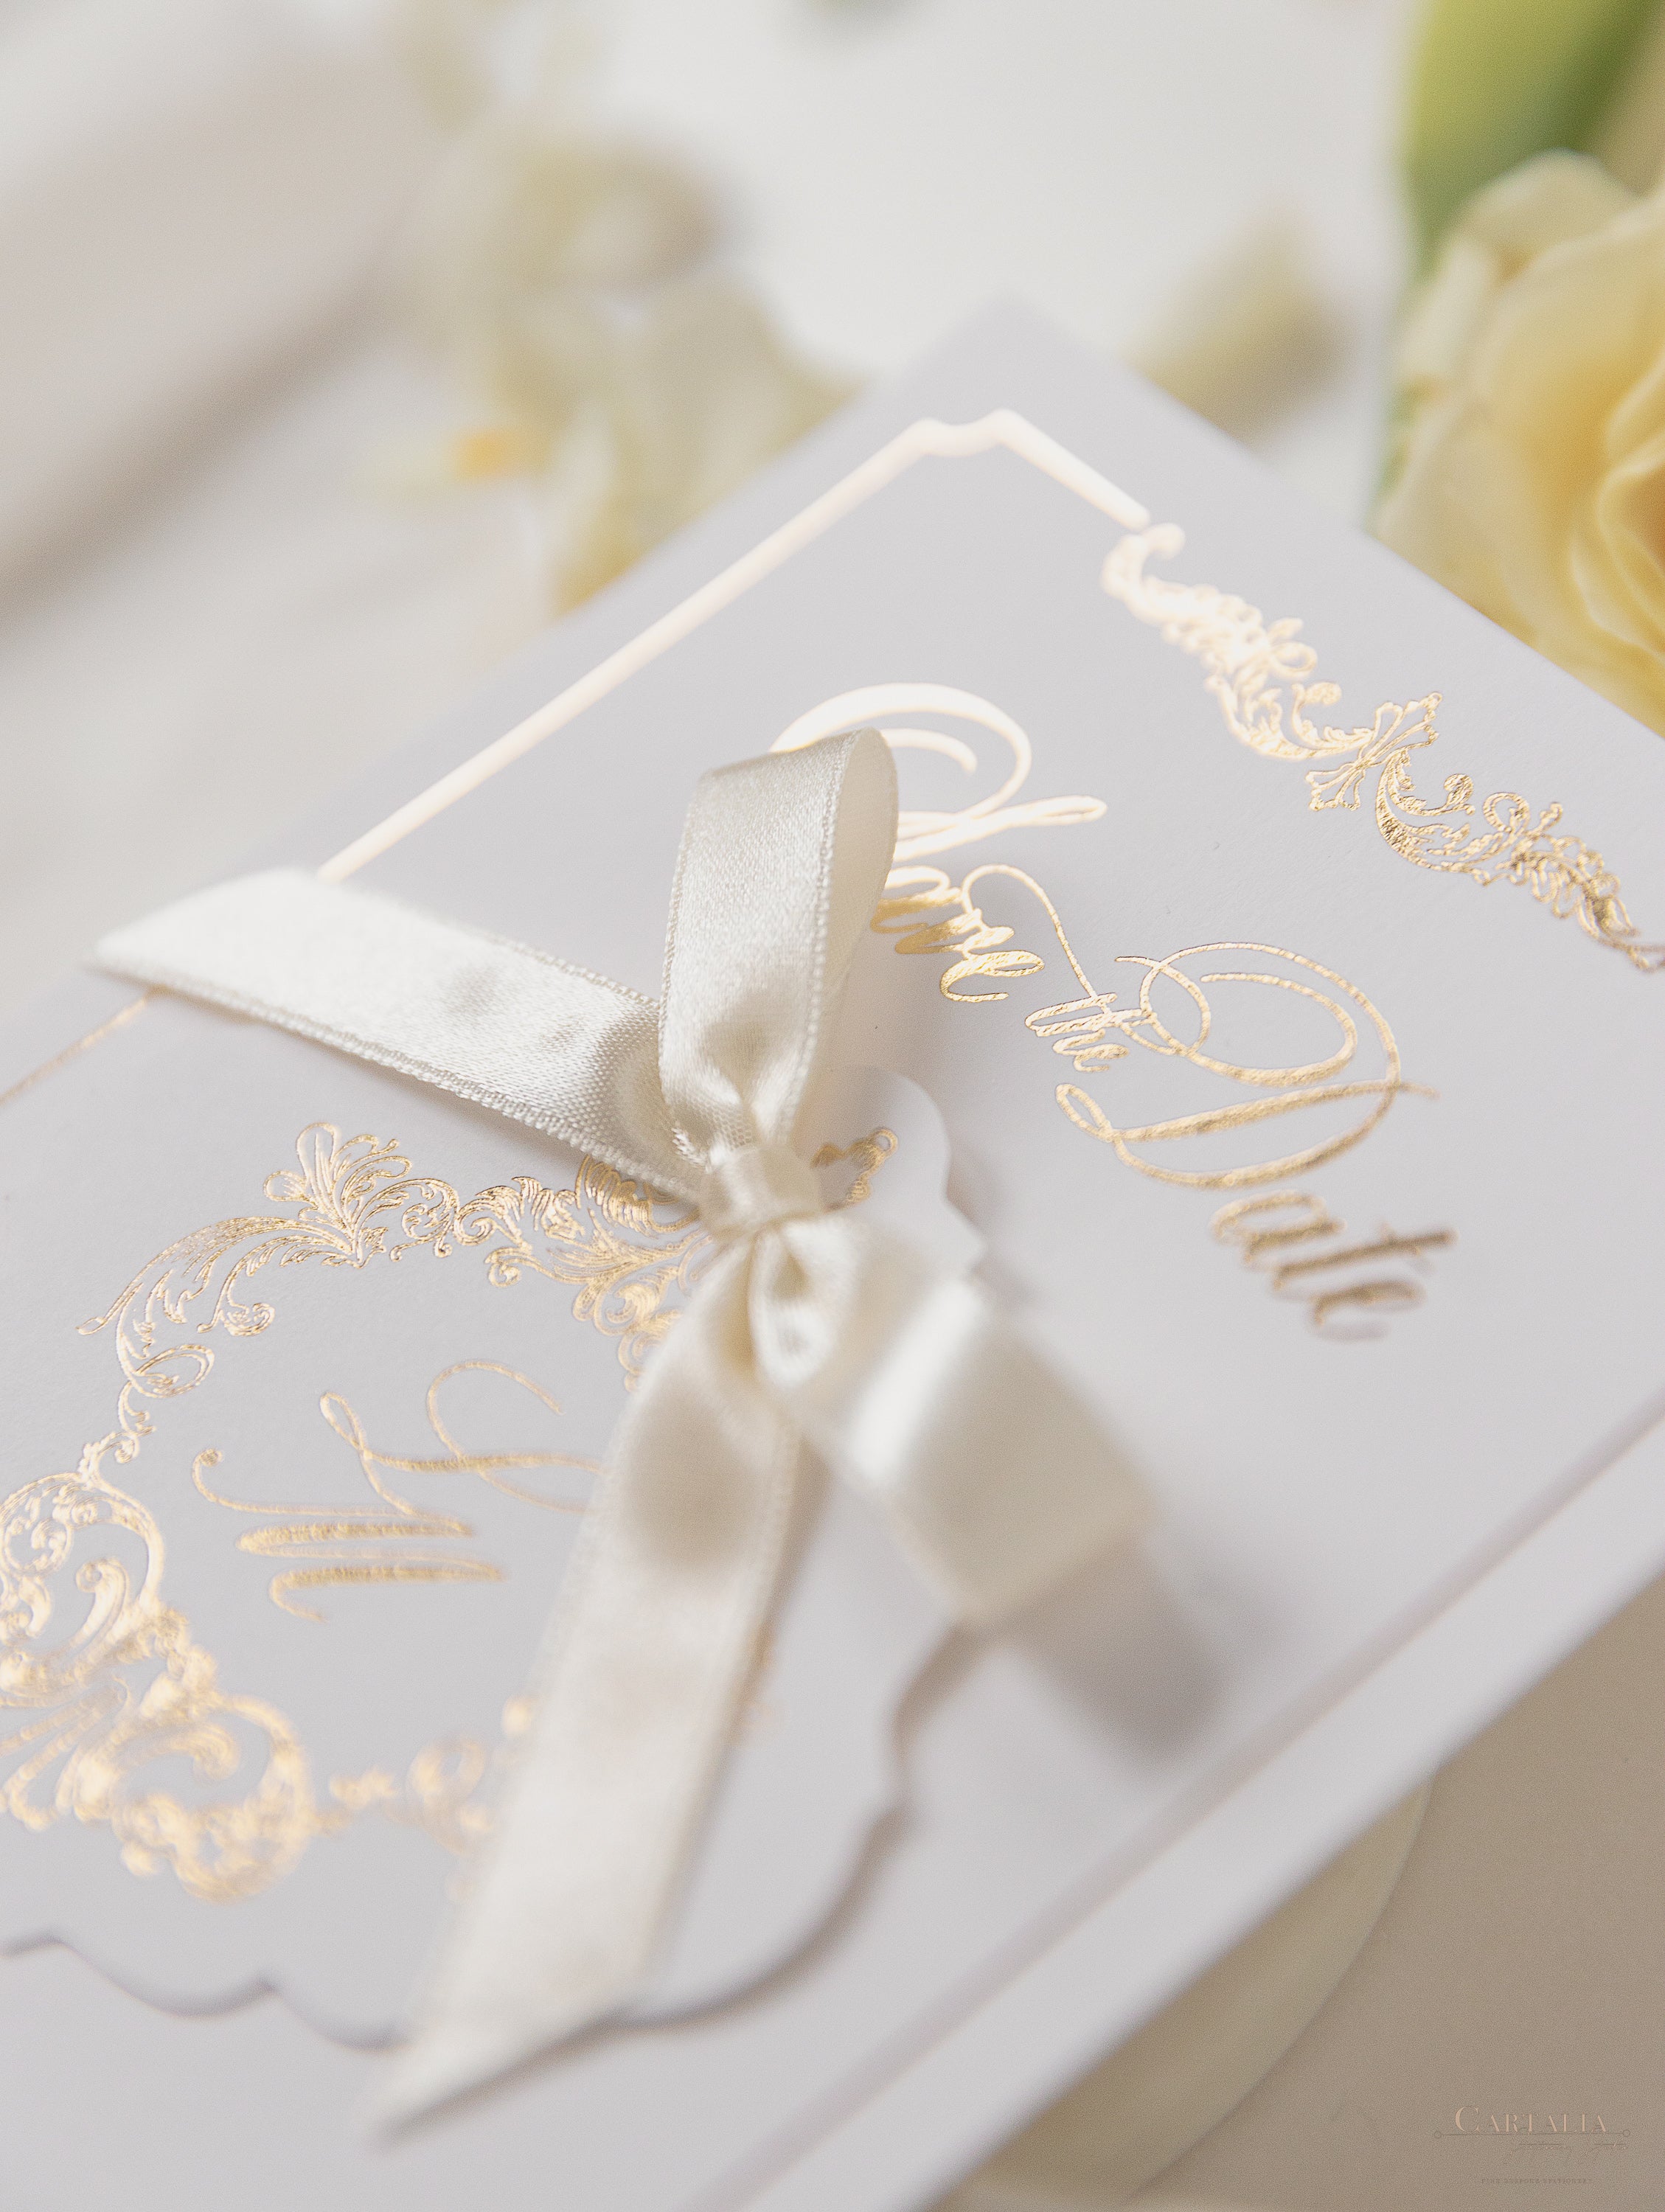  100 x Save the Date Labels Real Gold Foil Embossed